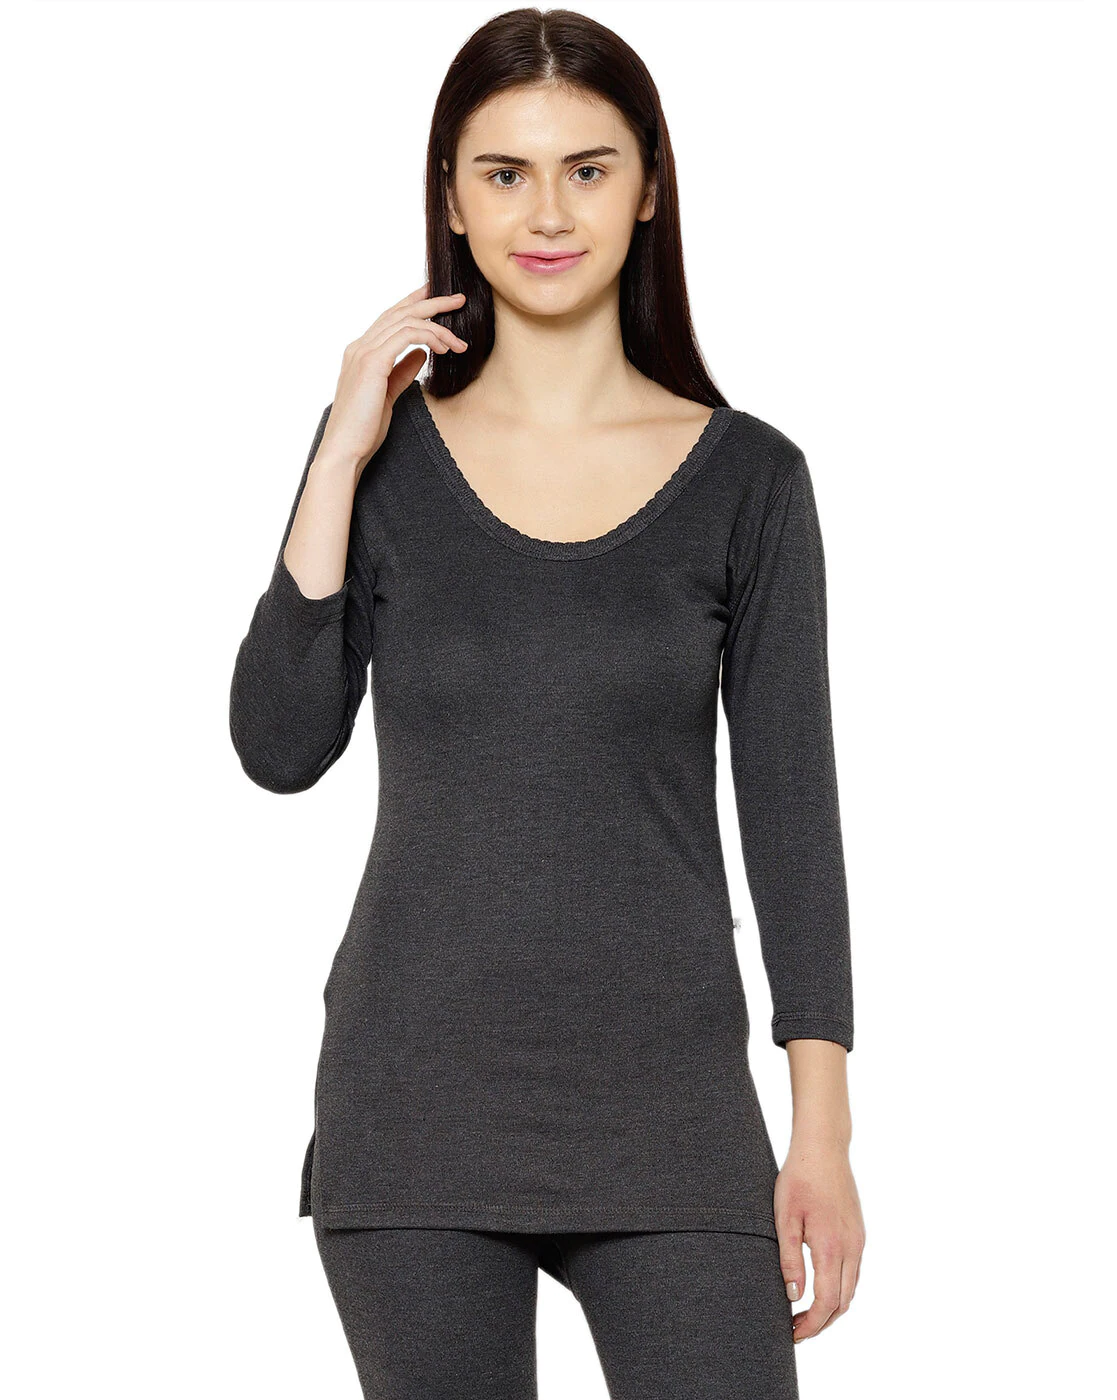 1. Thermal wear for ladies